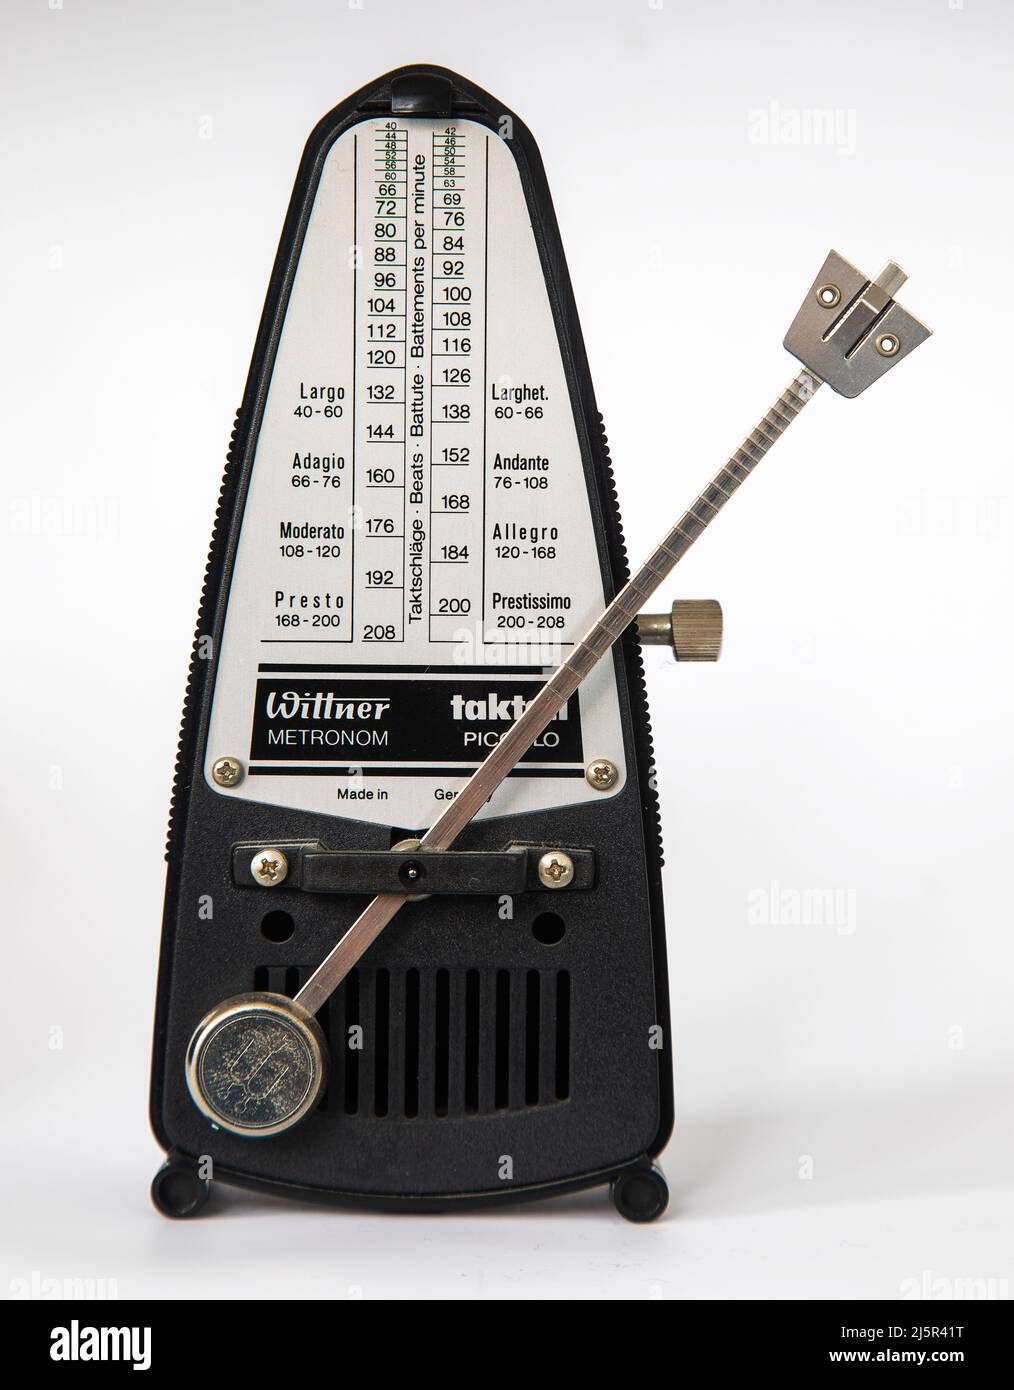 A metronome is a device that produces an audible click or other sound at a  regular interval that can be set by the user, typically in beats per minute  Stock Photo 